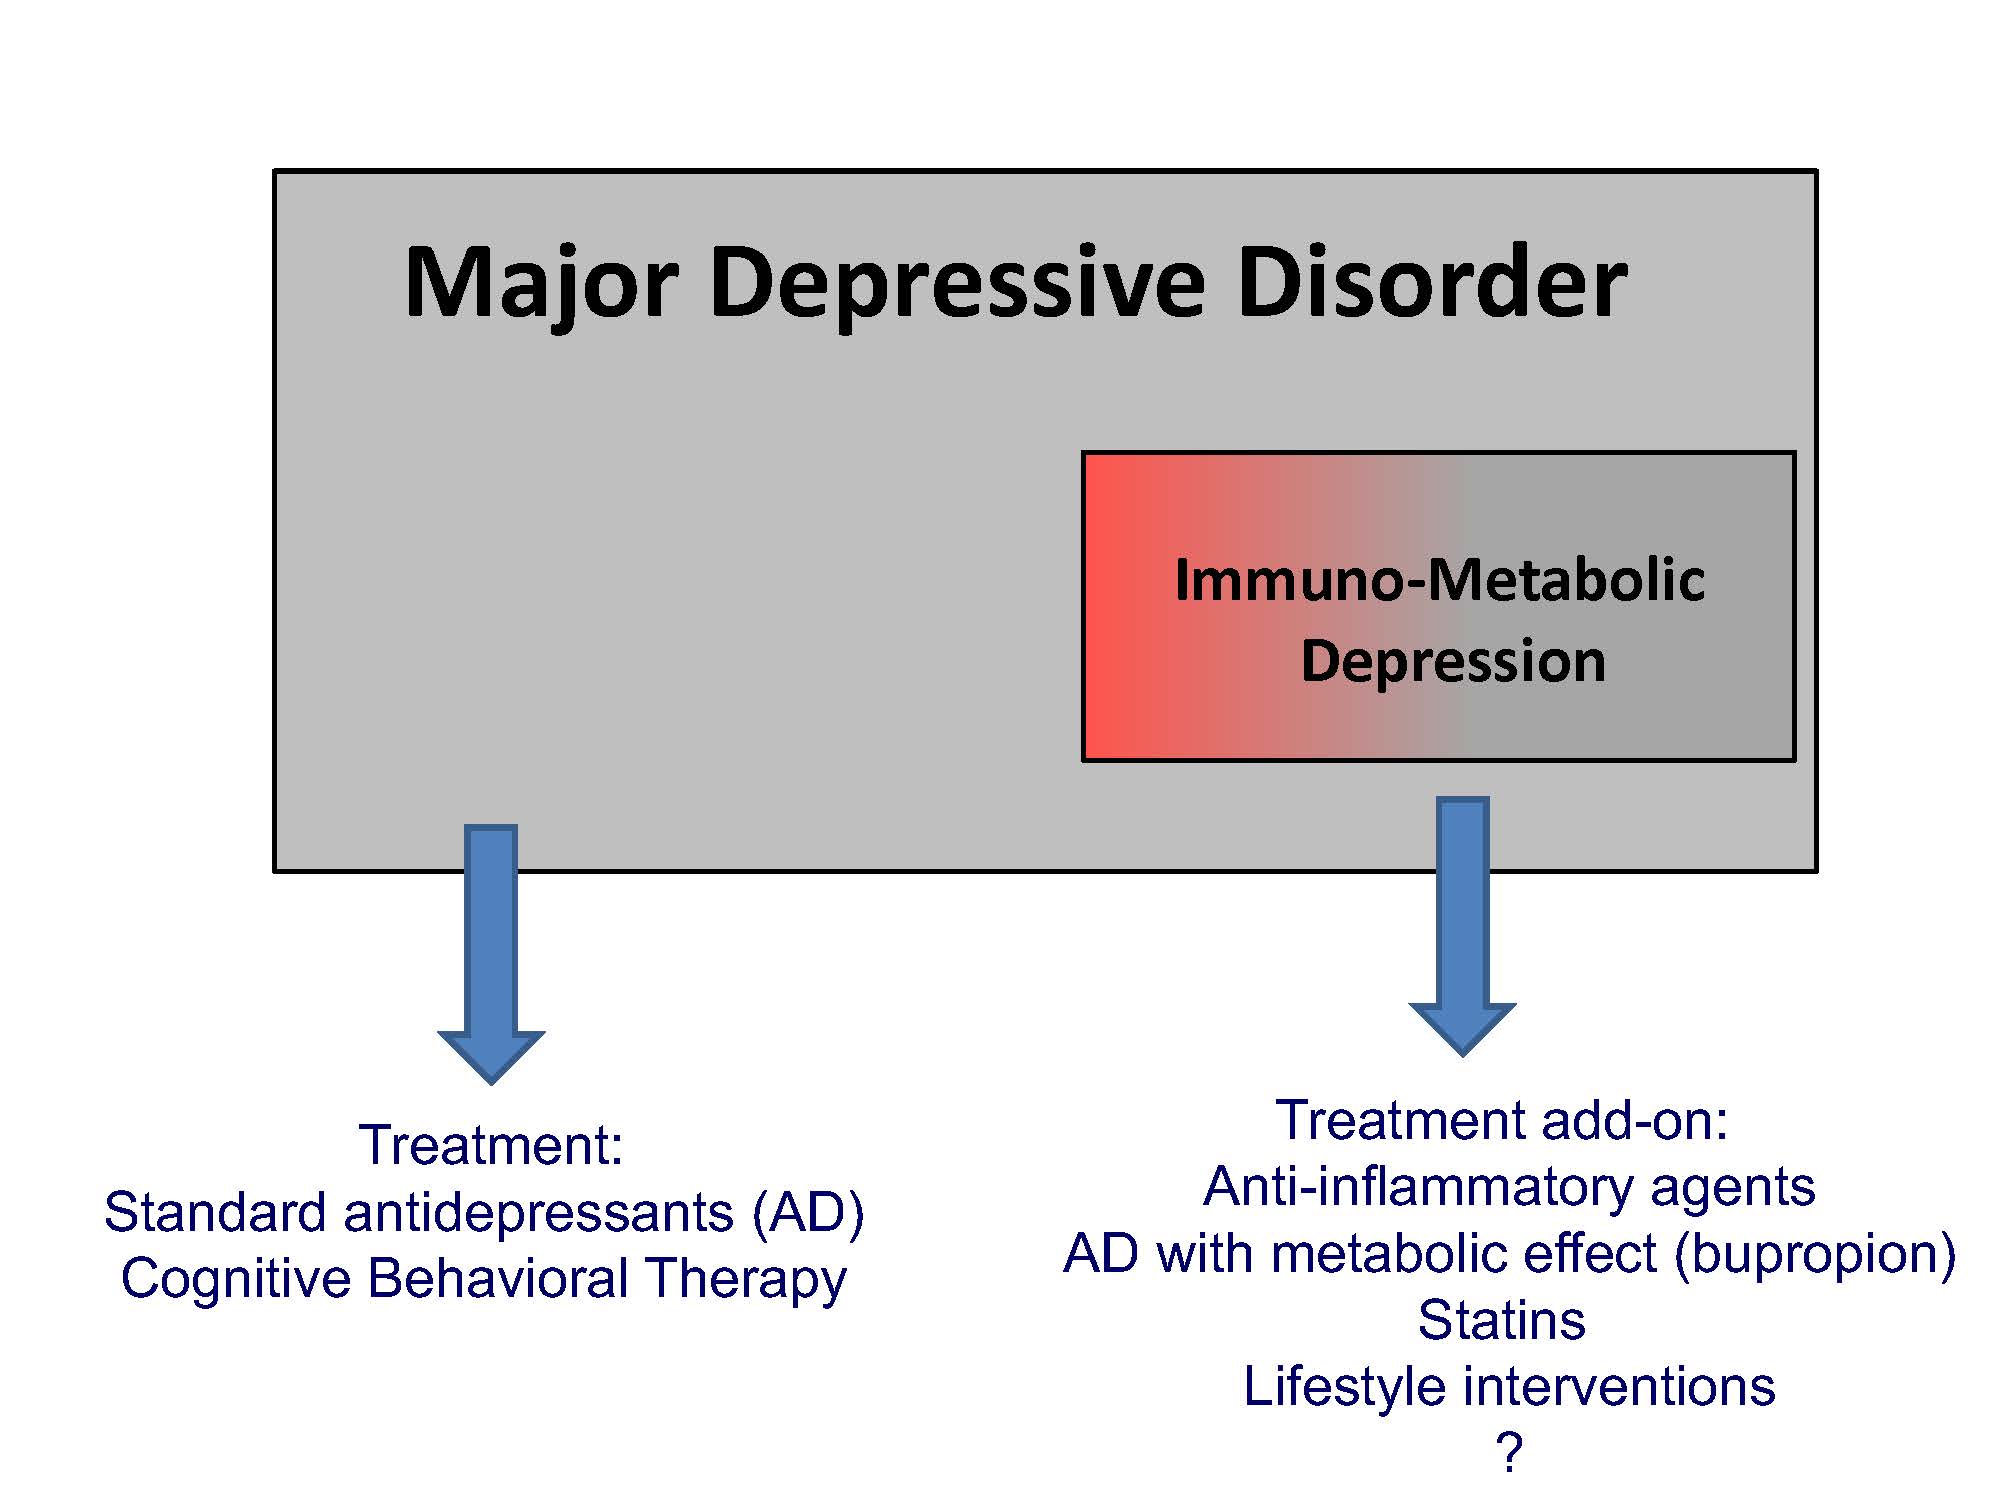  Illustration of the position of the immune-metabolic depression model within the major depressive disorder spectrum and potential treatment implications.